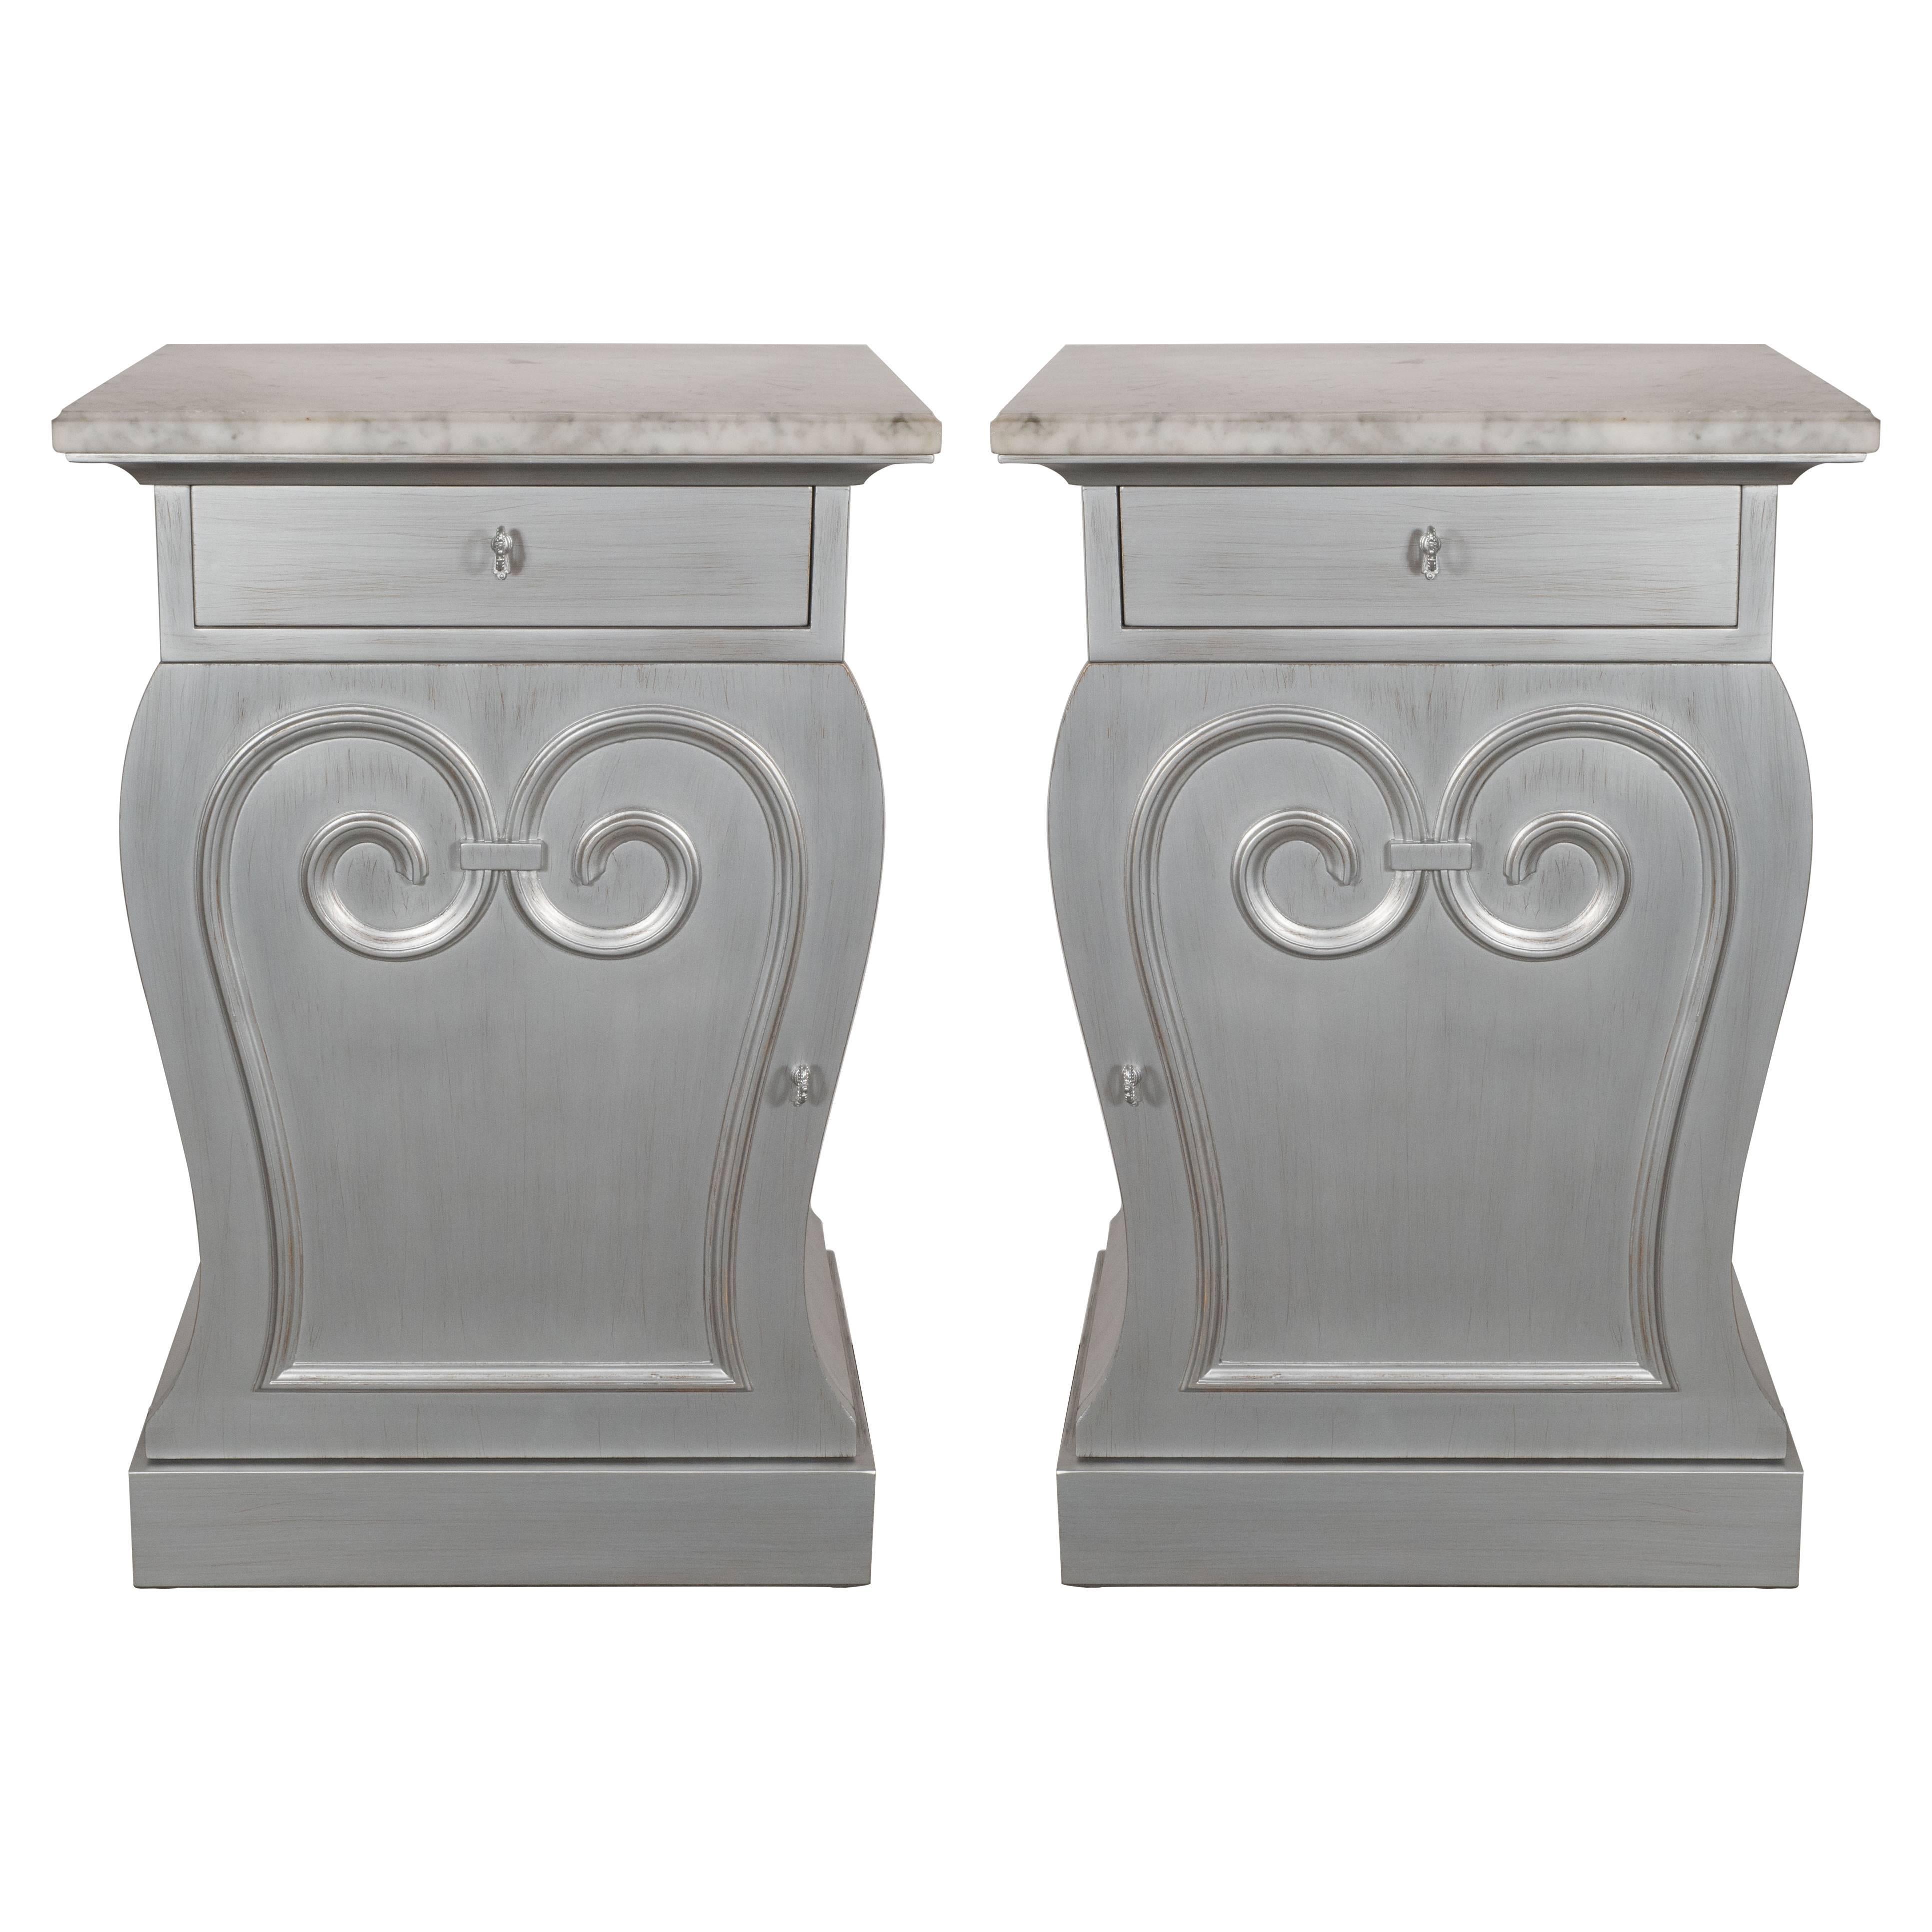 Pair of Deco End Tables in Silverleaf with Carrara Marble Tops by Grosfeld House